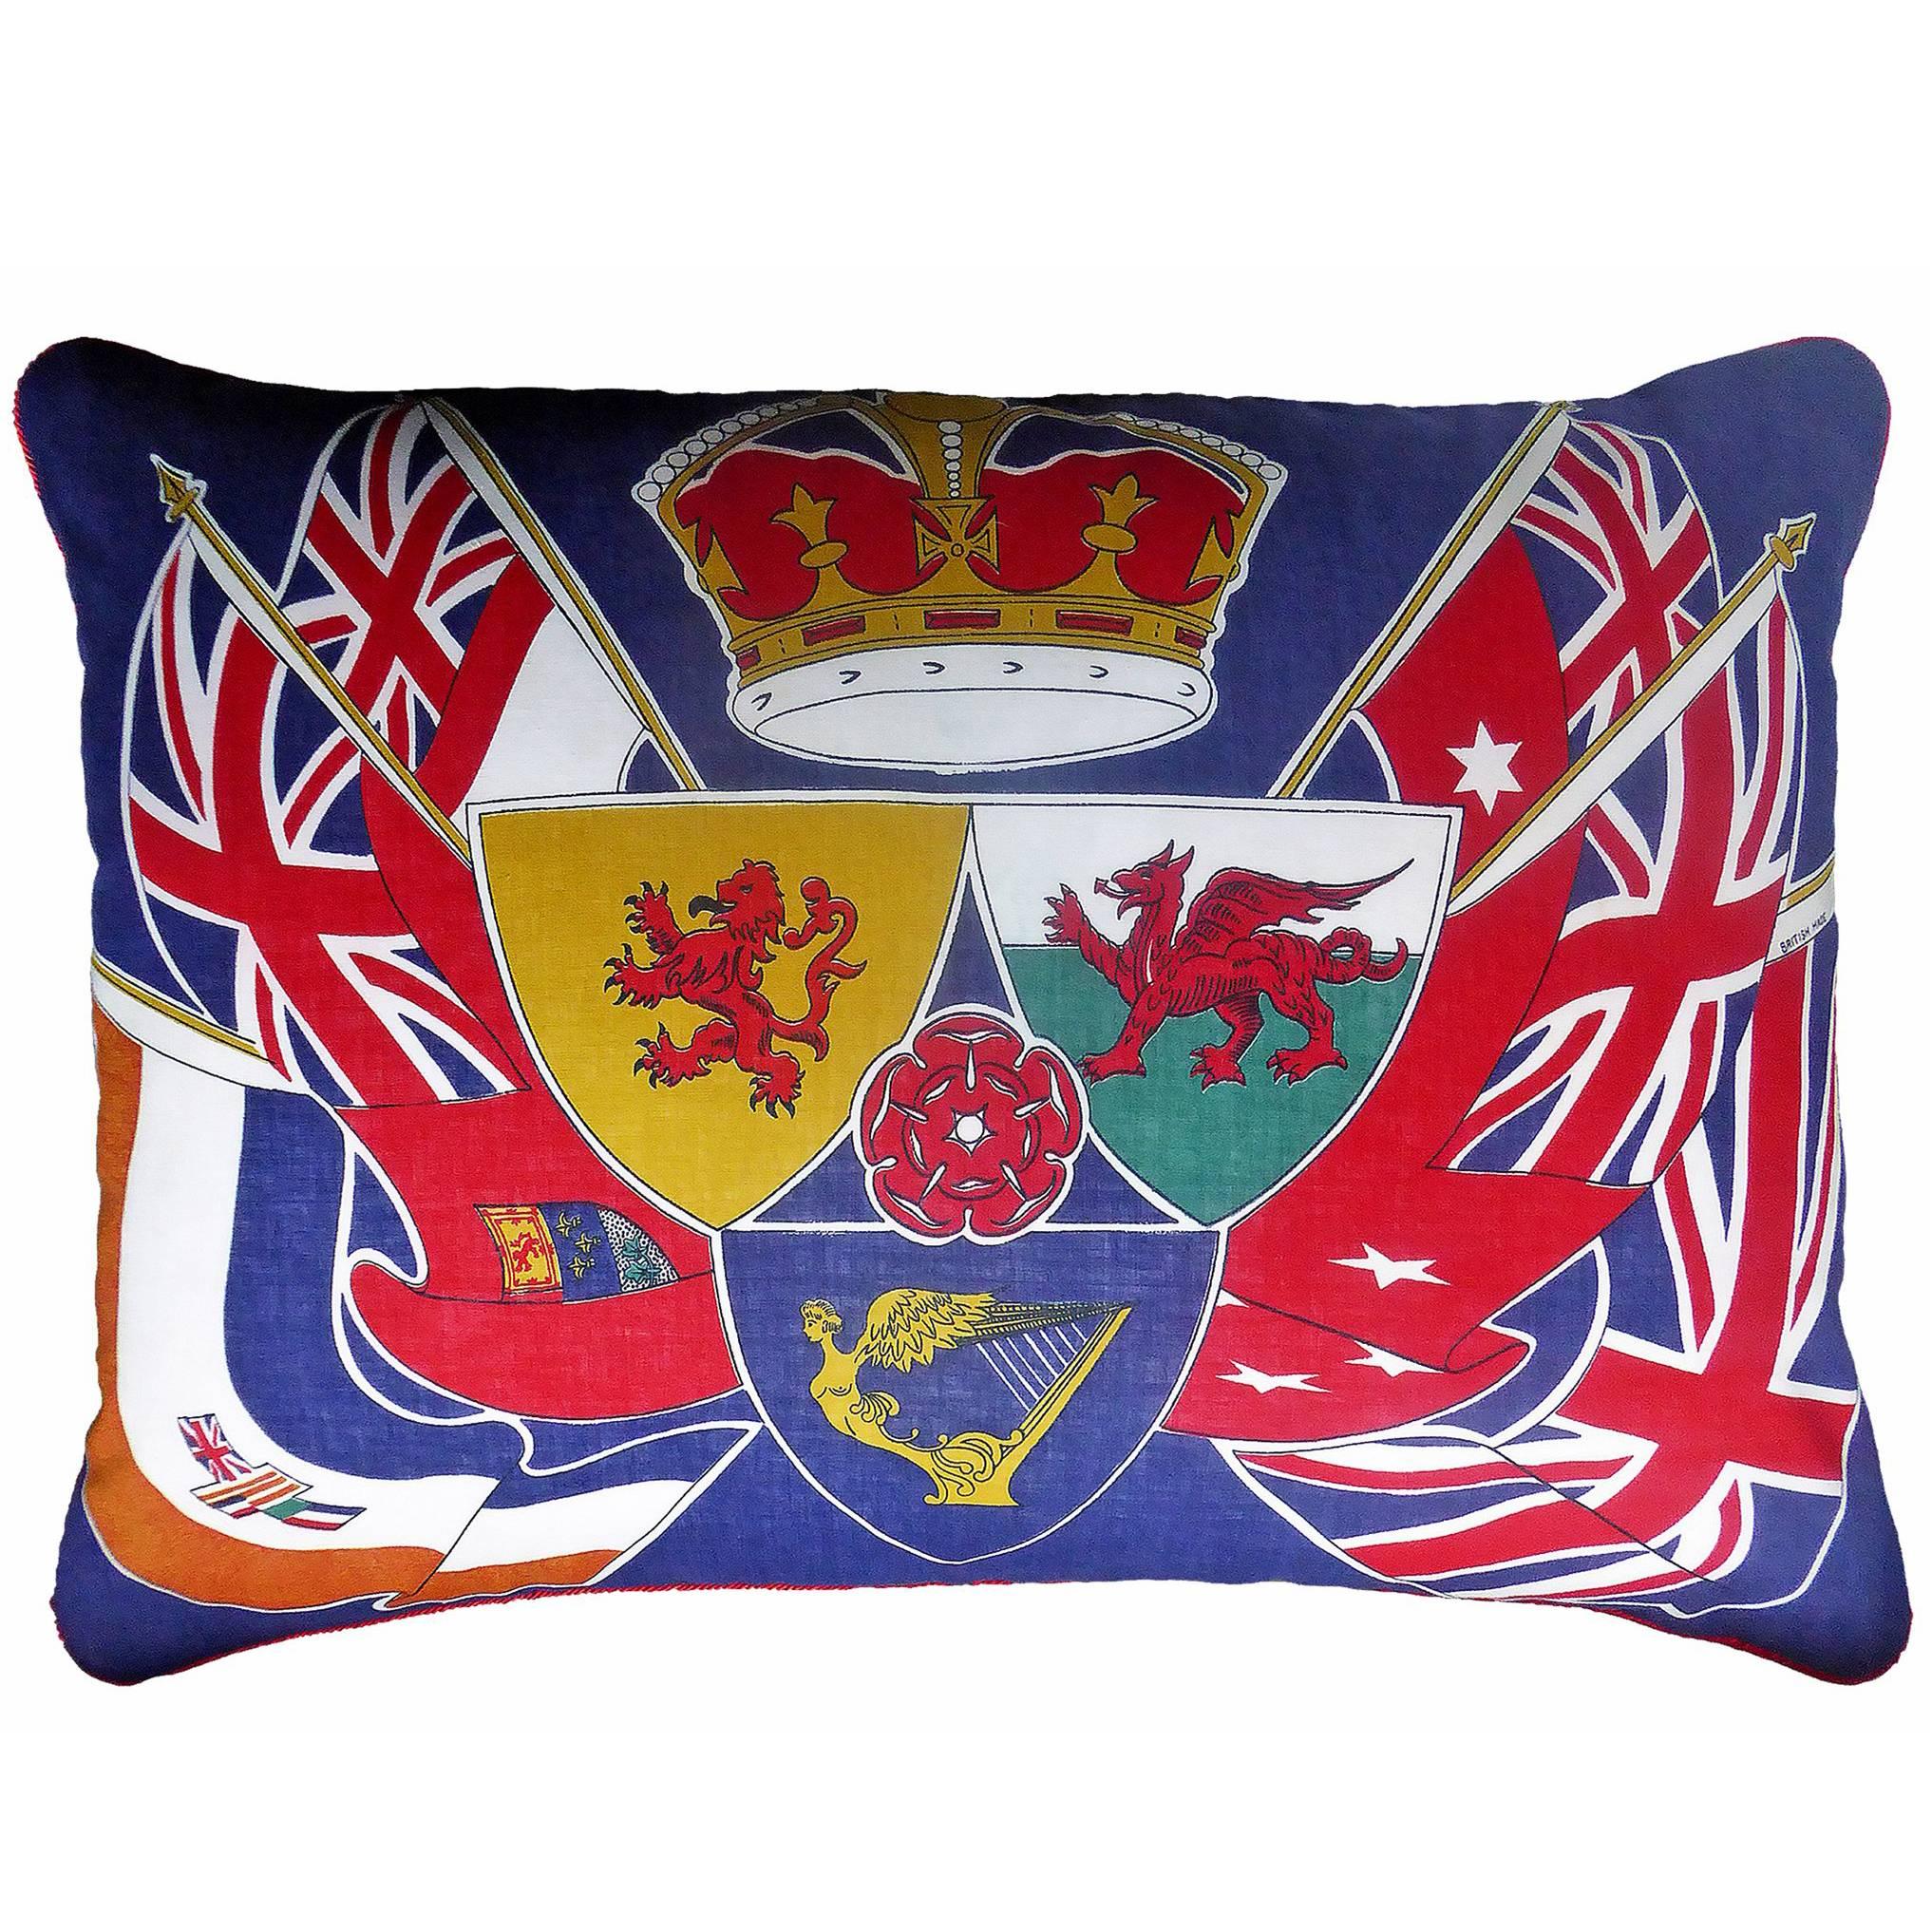 Vintage Cushions "British Flag" Bespoke 1950's & 1980's Pillow - Made in London